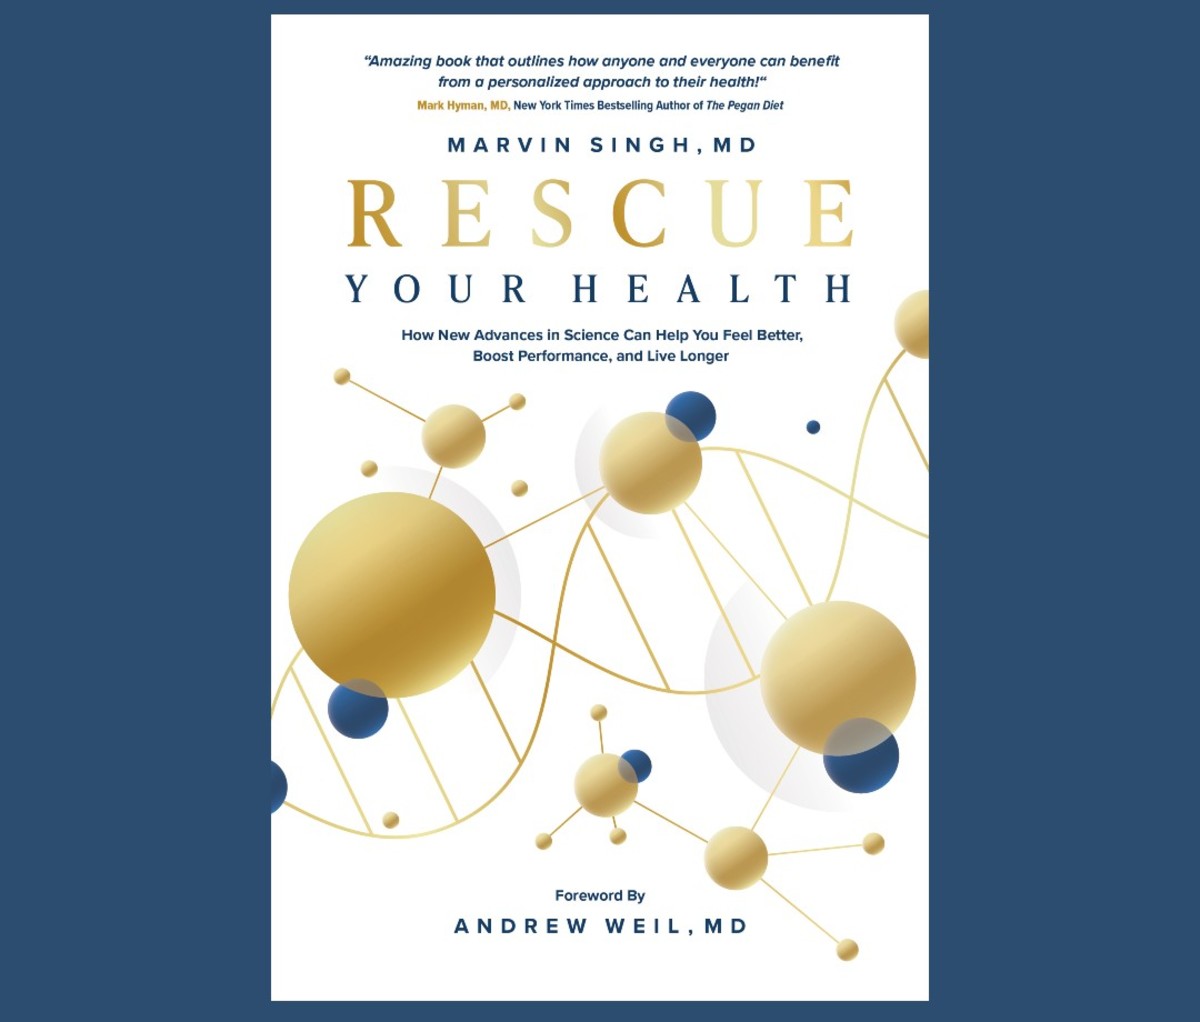 Rescue Your Health: How New Advances in Science Can Help You Feel Better, Boost Performance, and Live Longer by Marvin Singh, MD